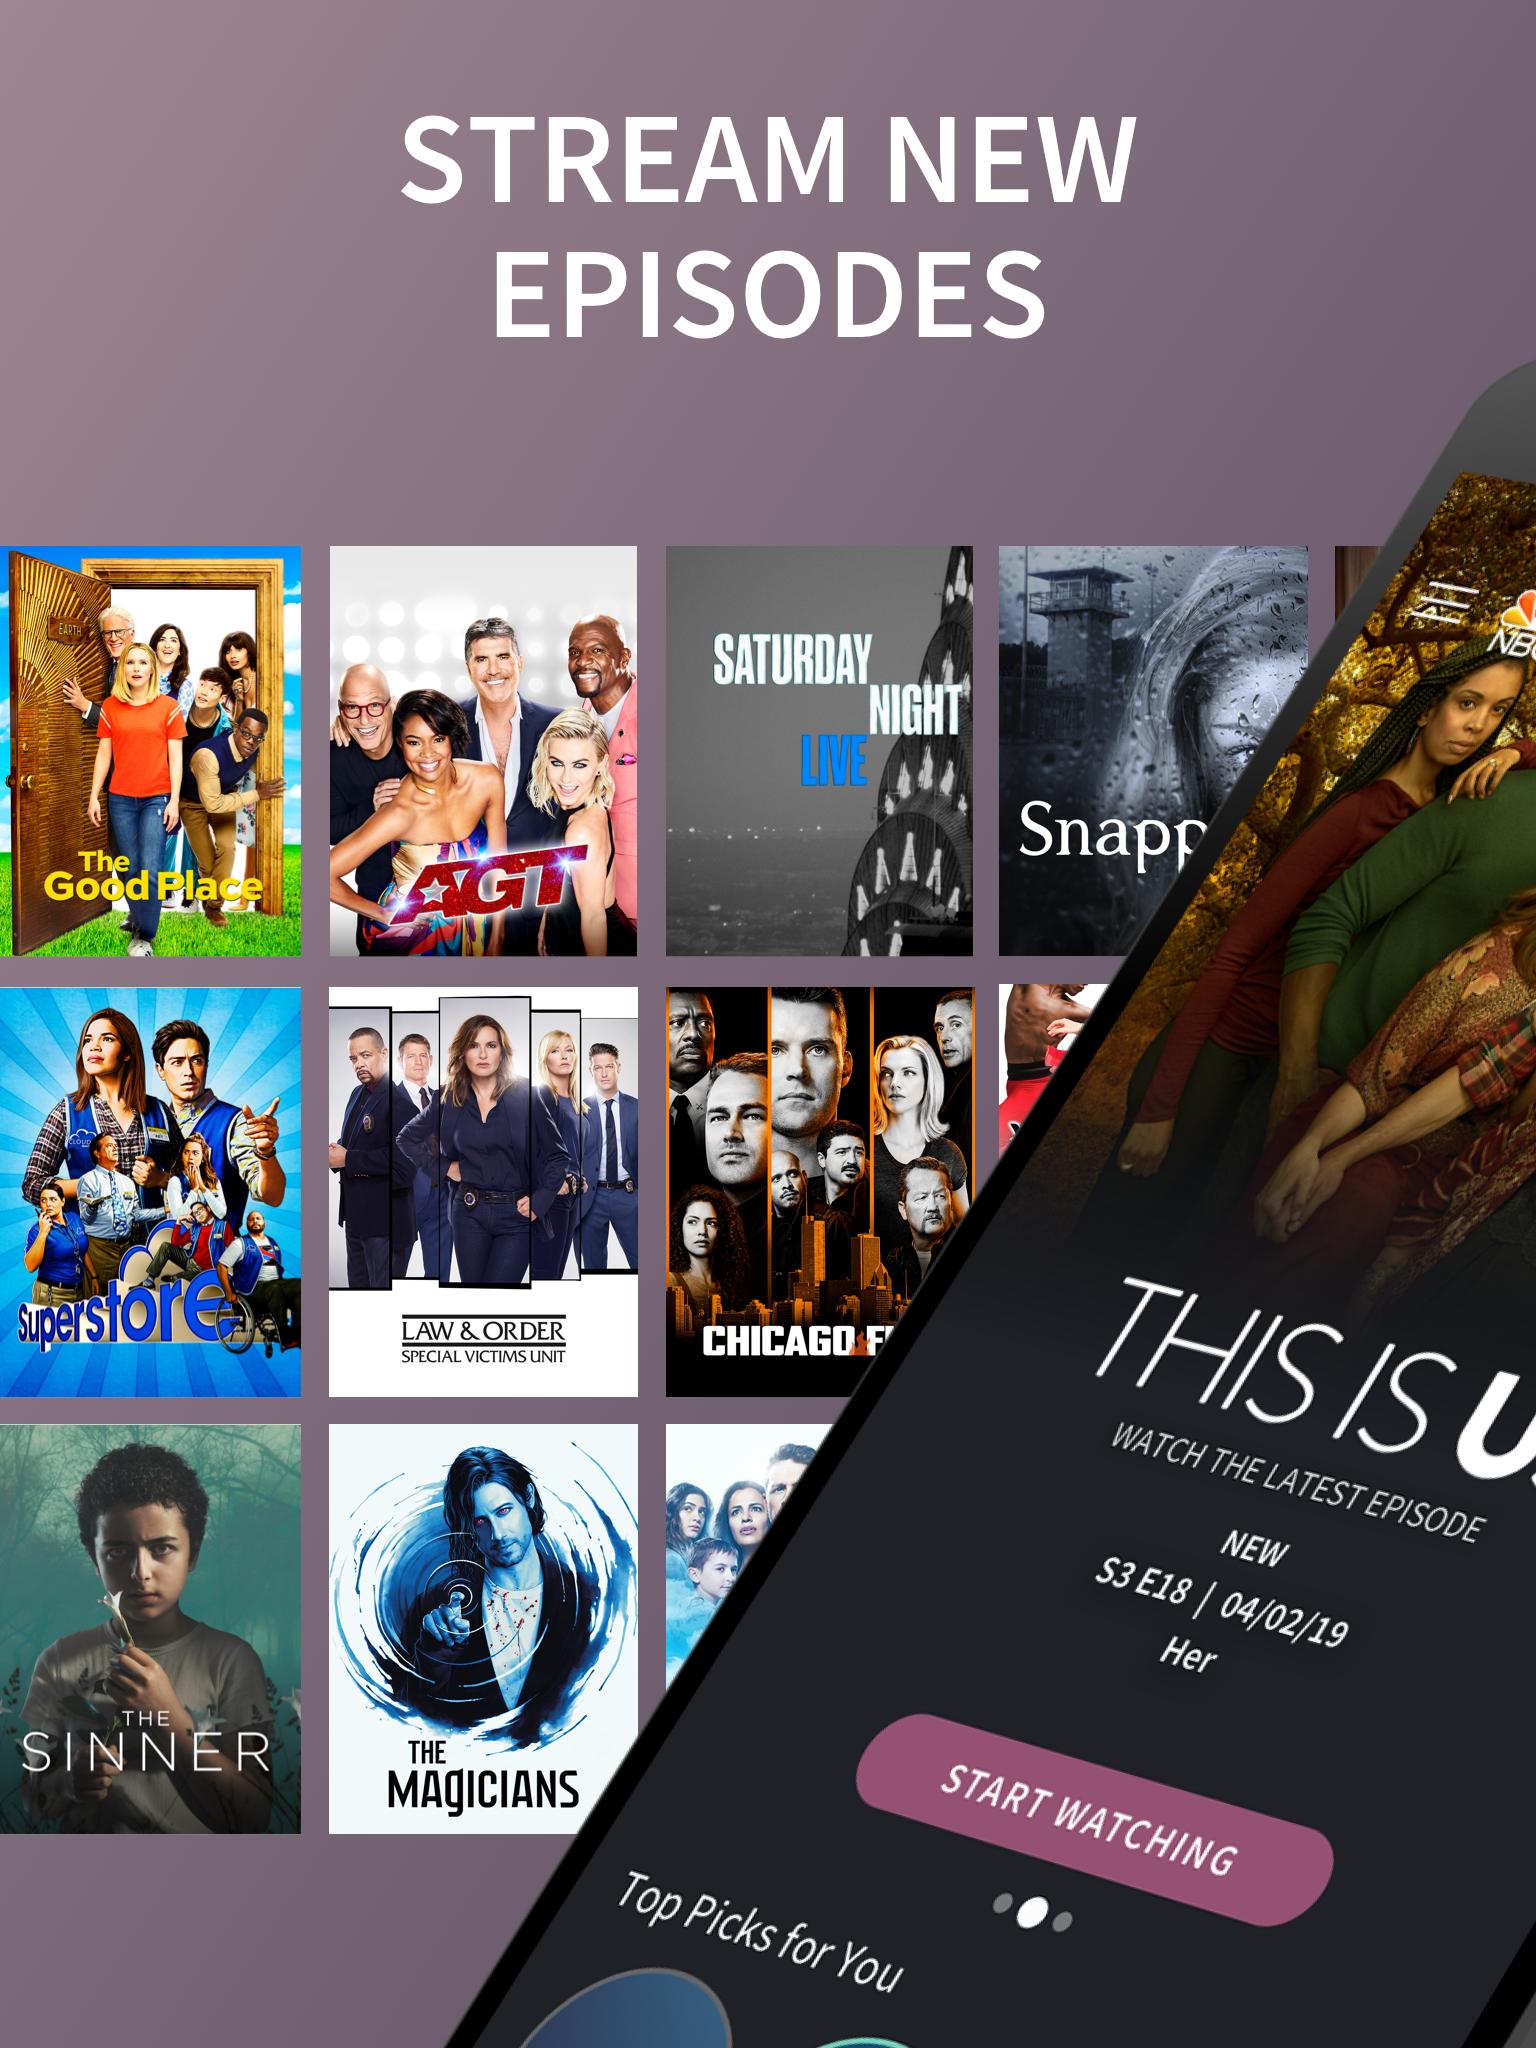 The NBC App - Stream Live TV and Episodes for Free 7.4.1 Screenshot 6